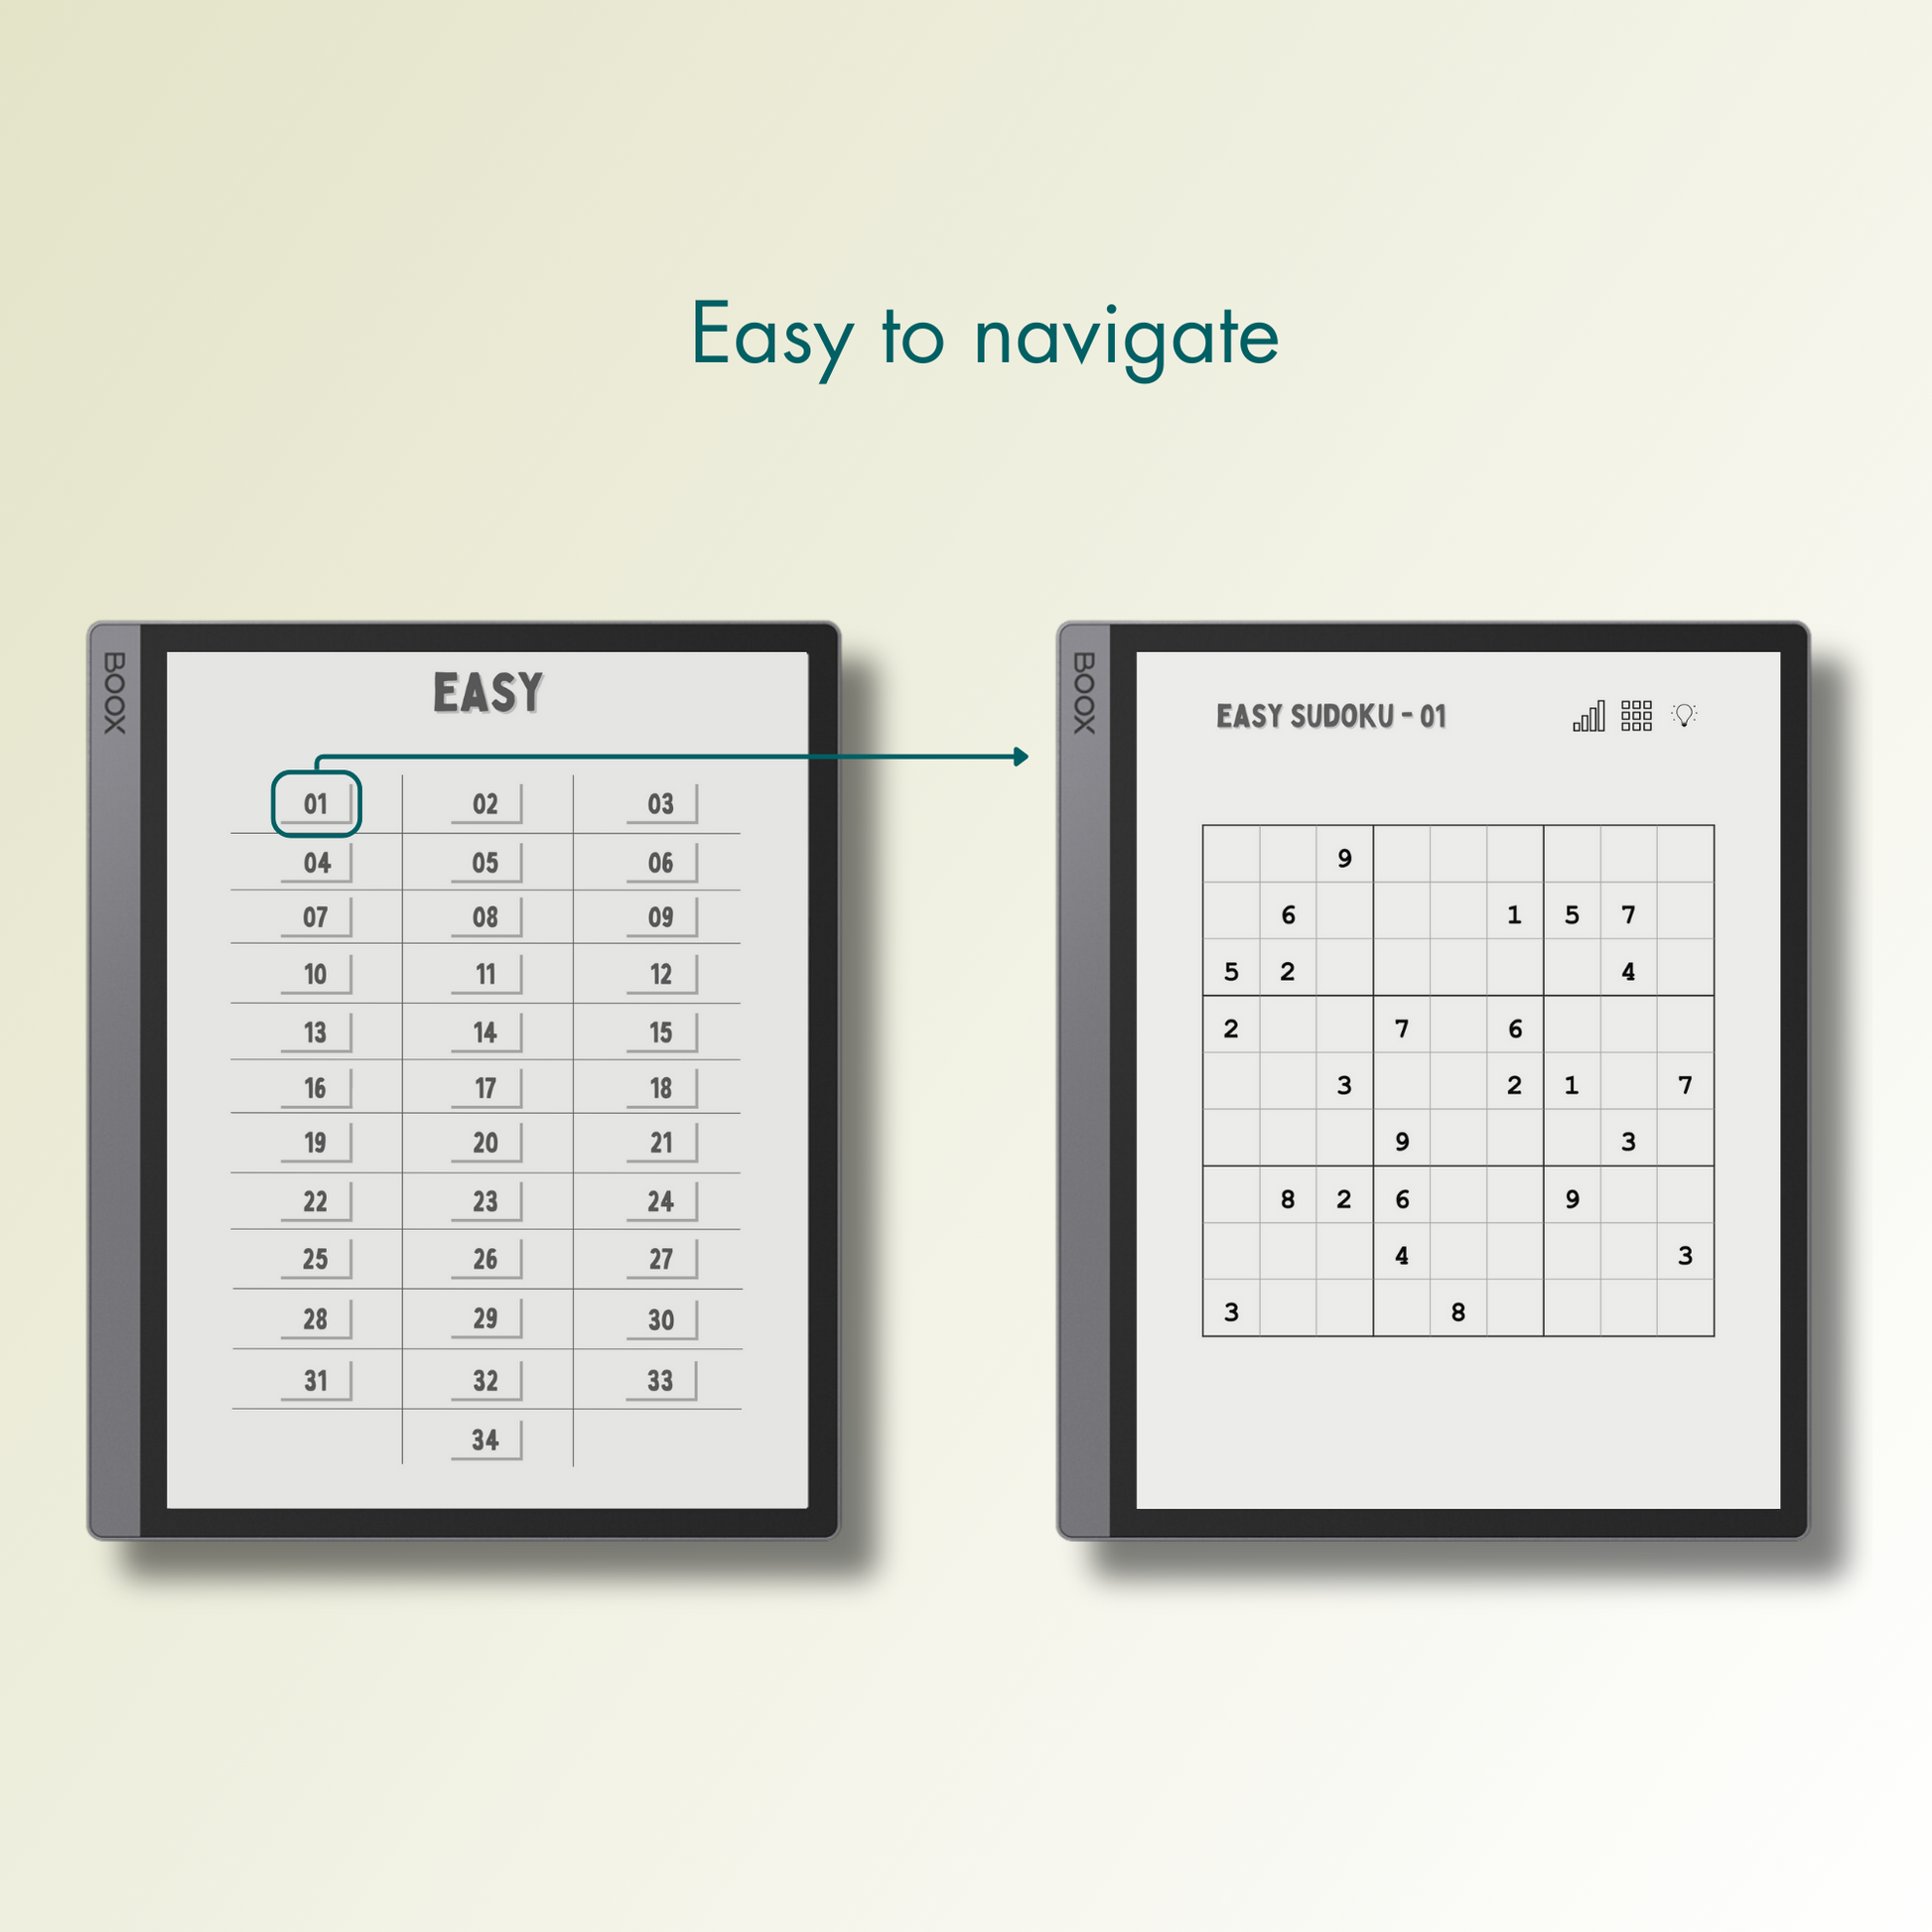 Onyx Boox Sudoku Puzzles with easy navigations.